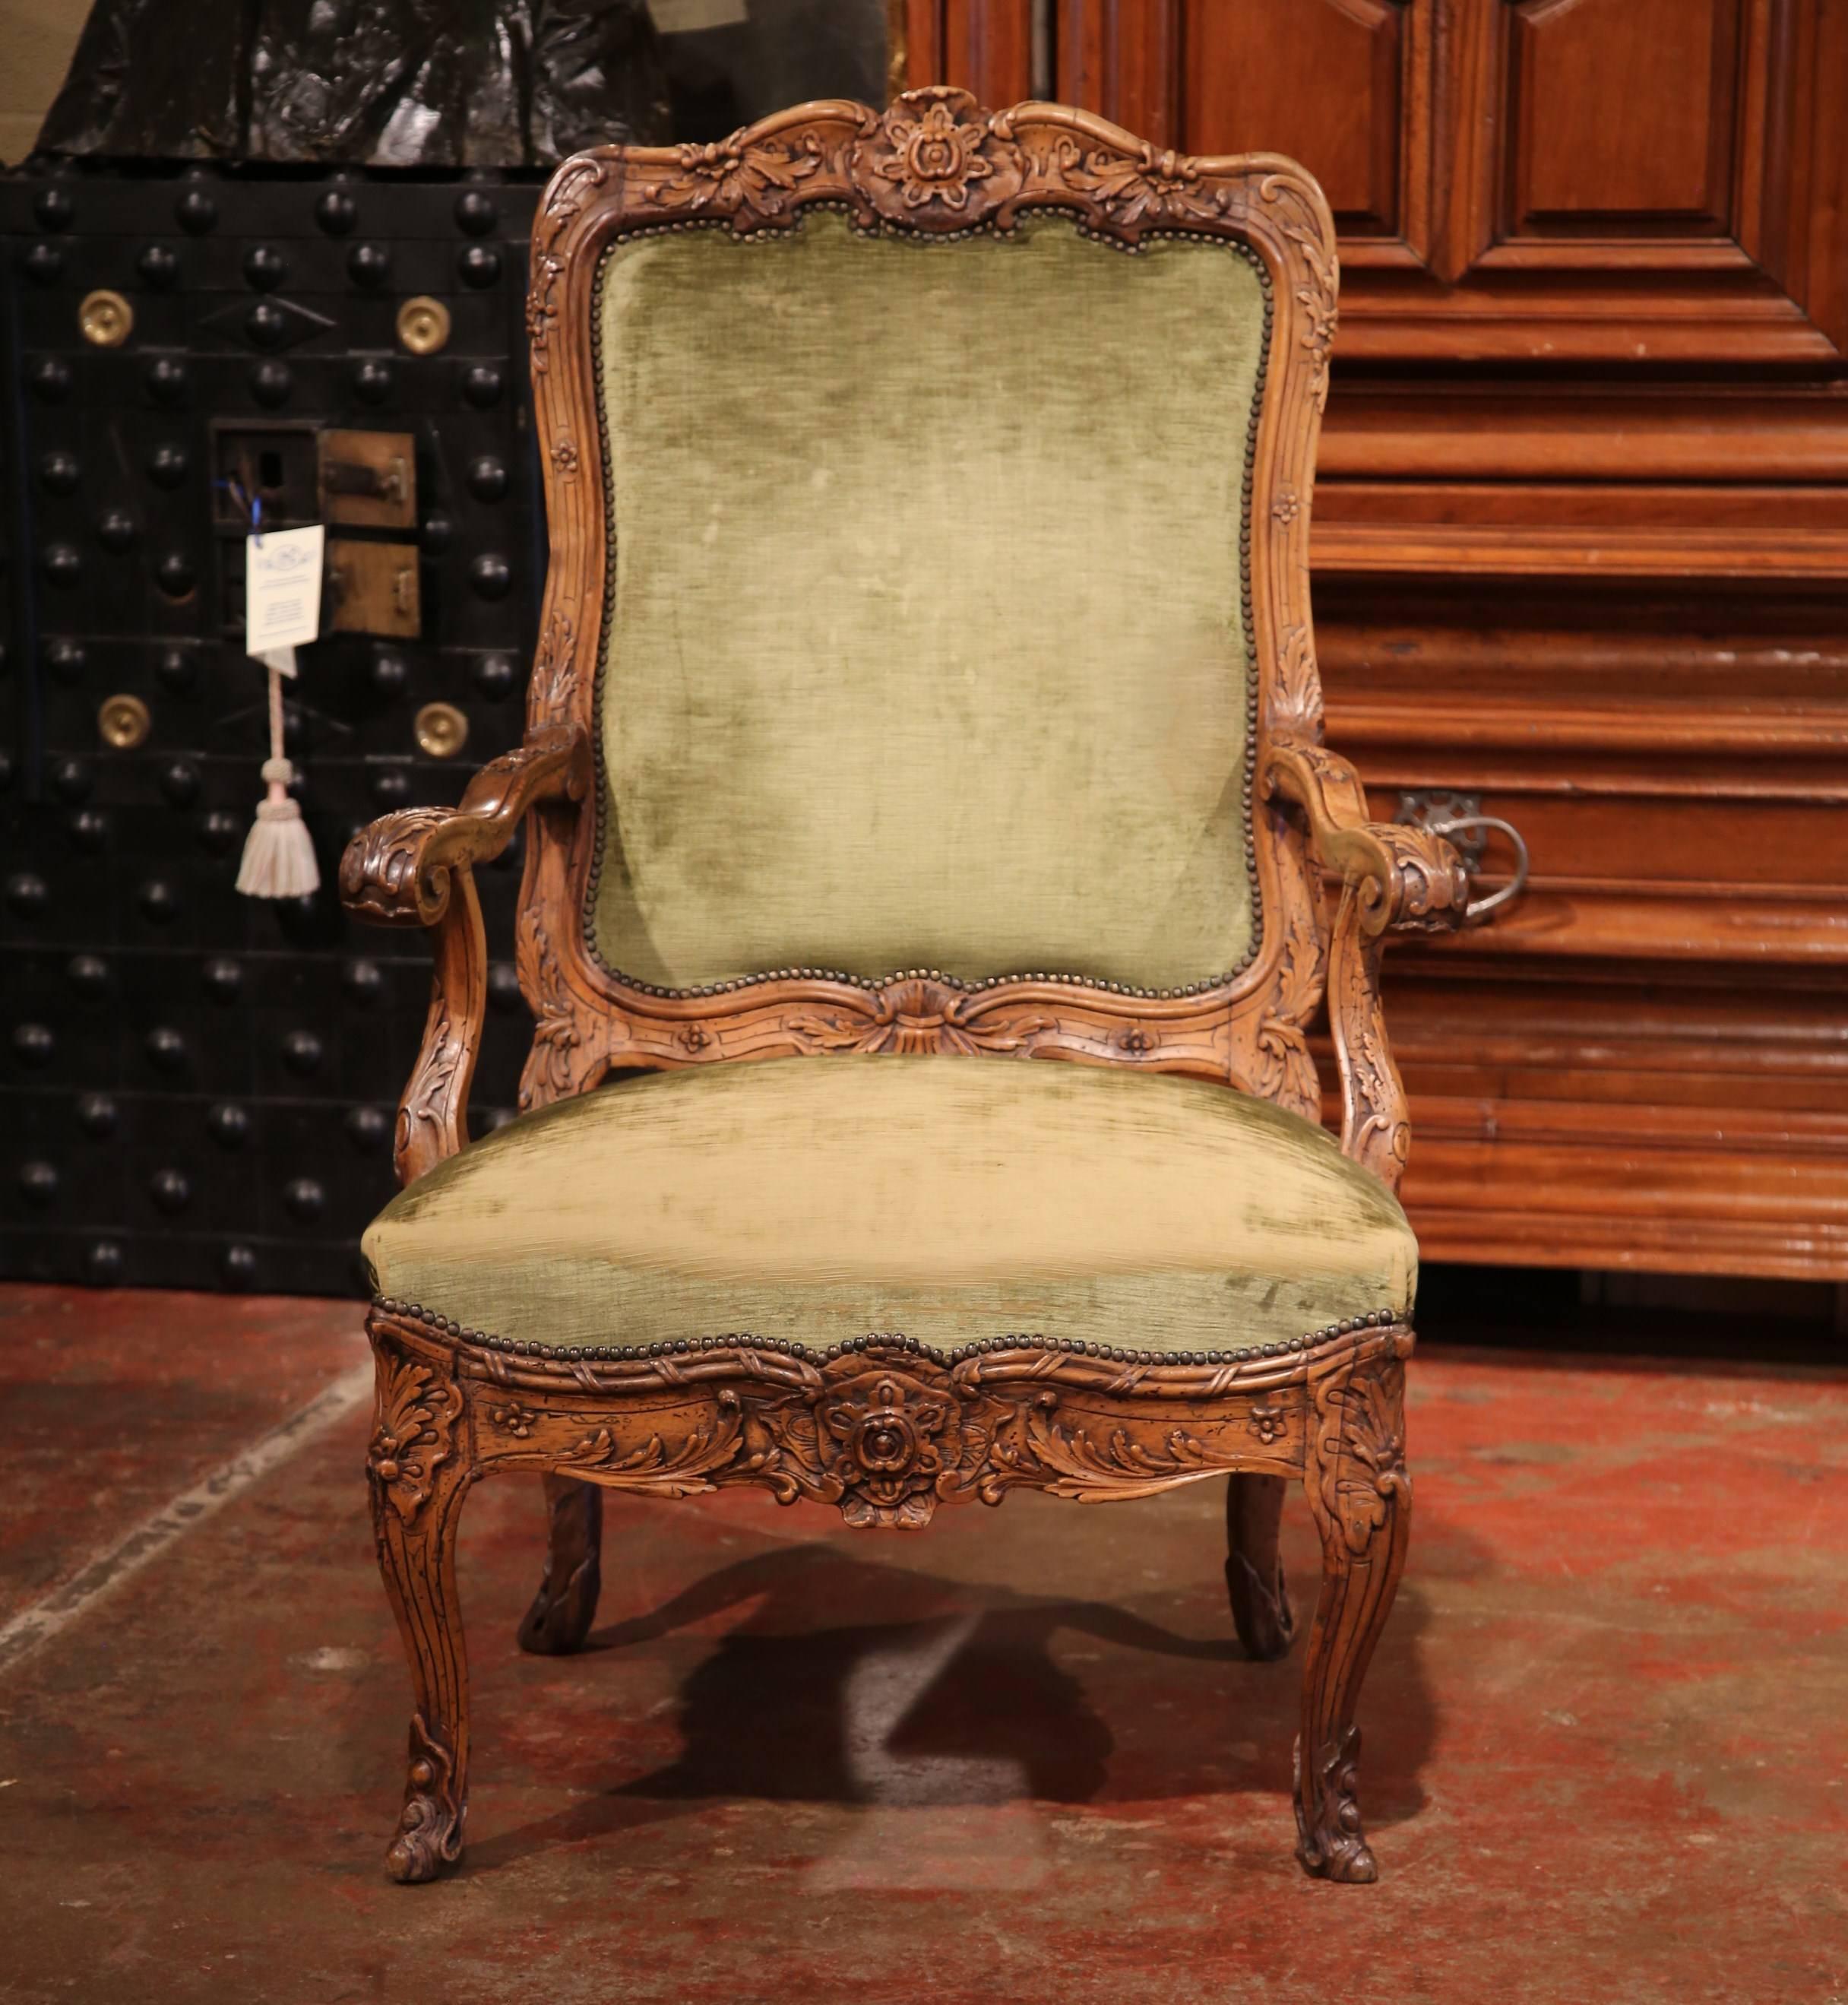 Beautifully carved antique armchair from France; crafted, circa 1860, the fruitwood chair features an ornate frame with deep carvings including carved flowers at the top and around the apron, and foliage throughout. The desk armchair is upholstered